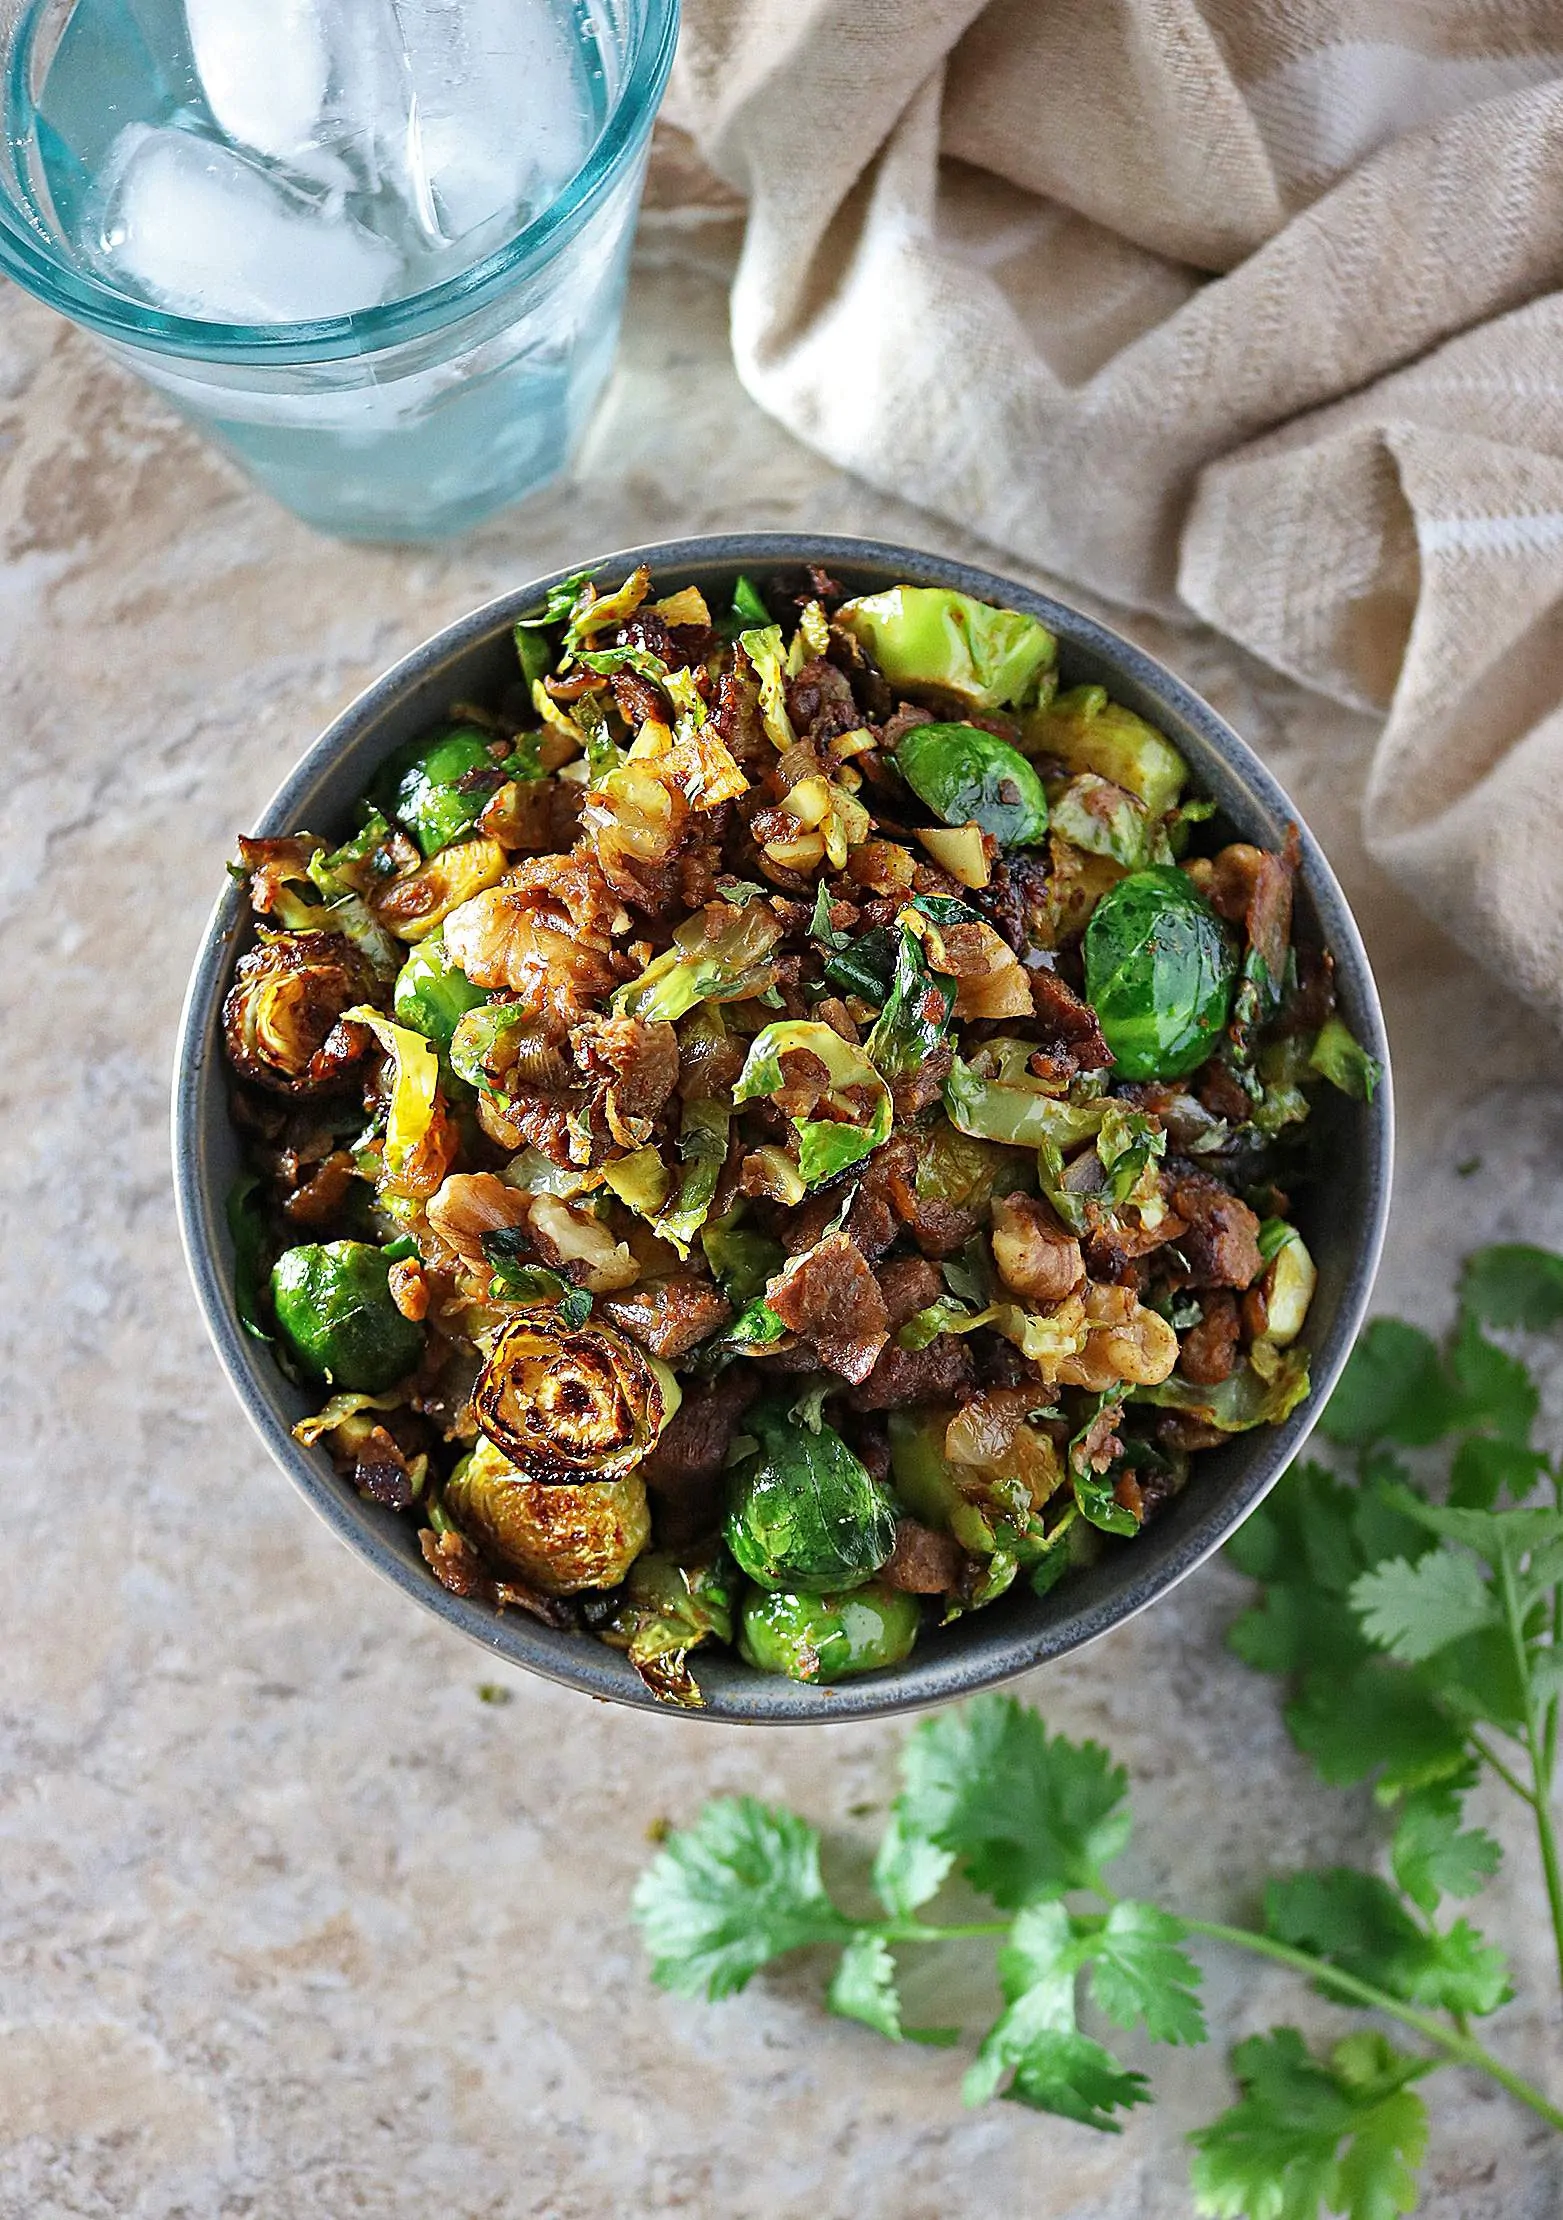 Hearty Sauteed Brussels Sprouts 'N Crumbles - Christmas or Thanksgiving Appetizer or Healthier Side